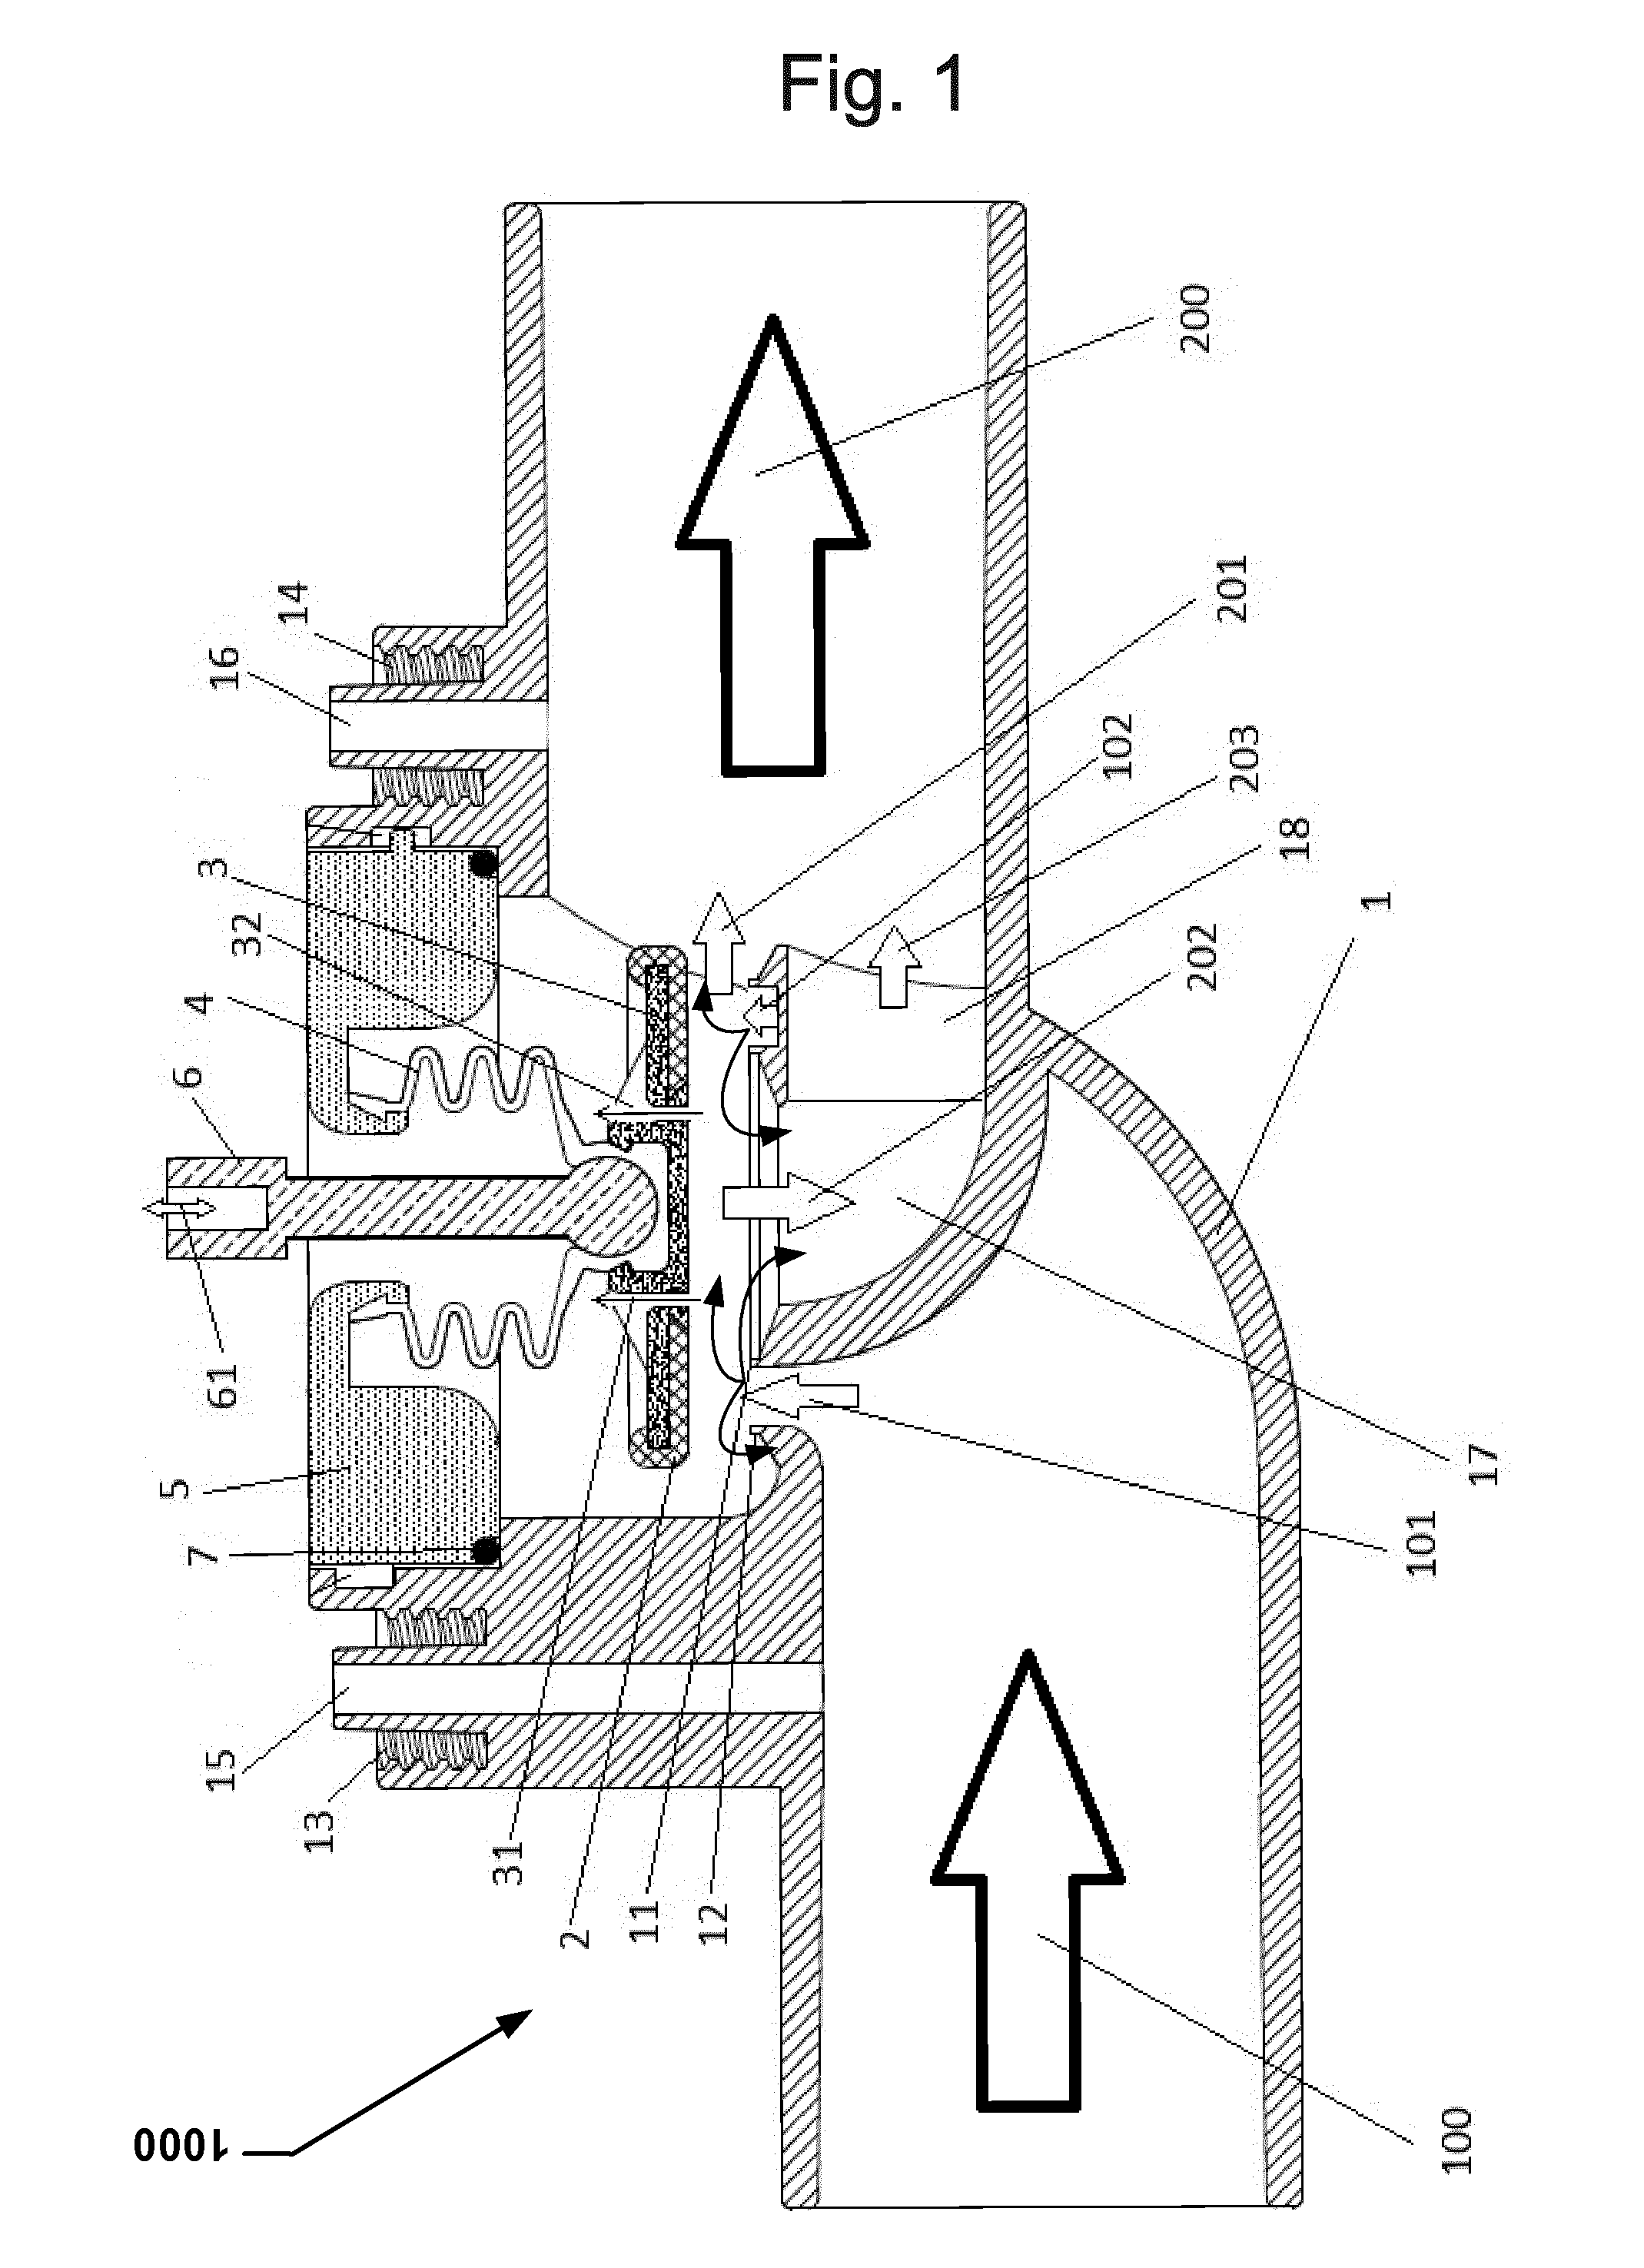 A valve for controlling a flow